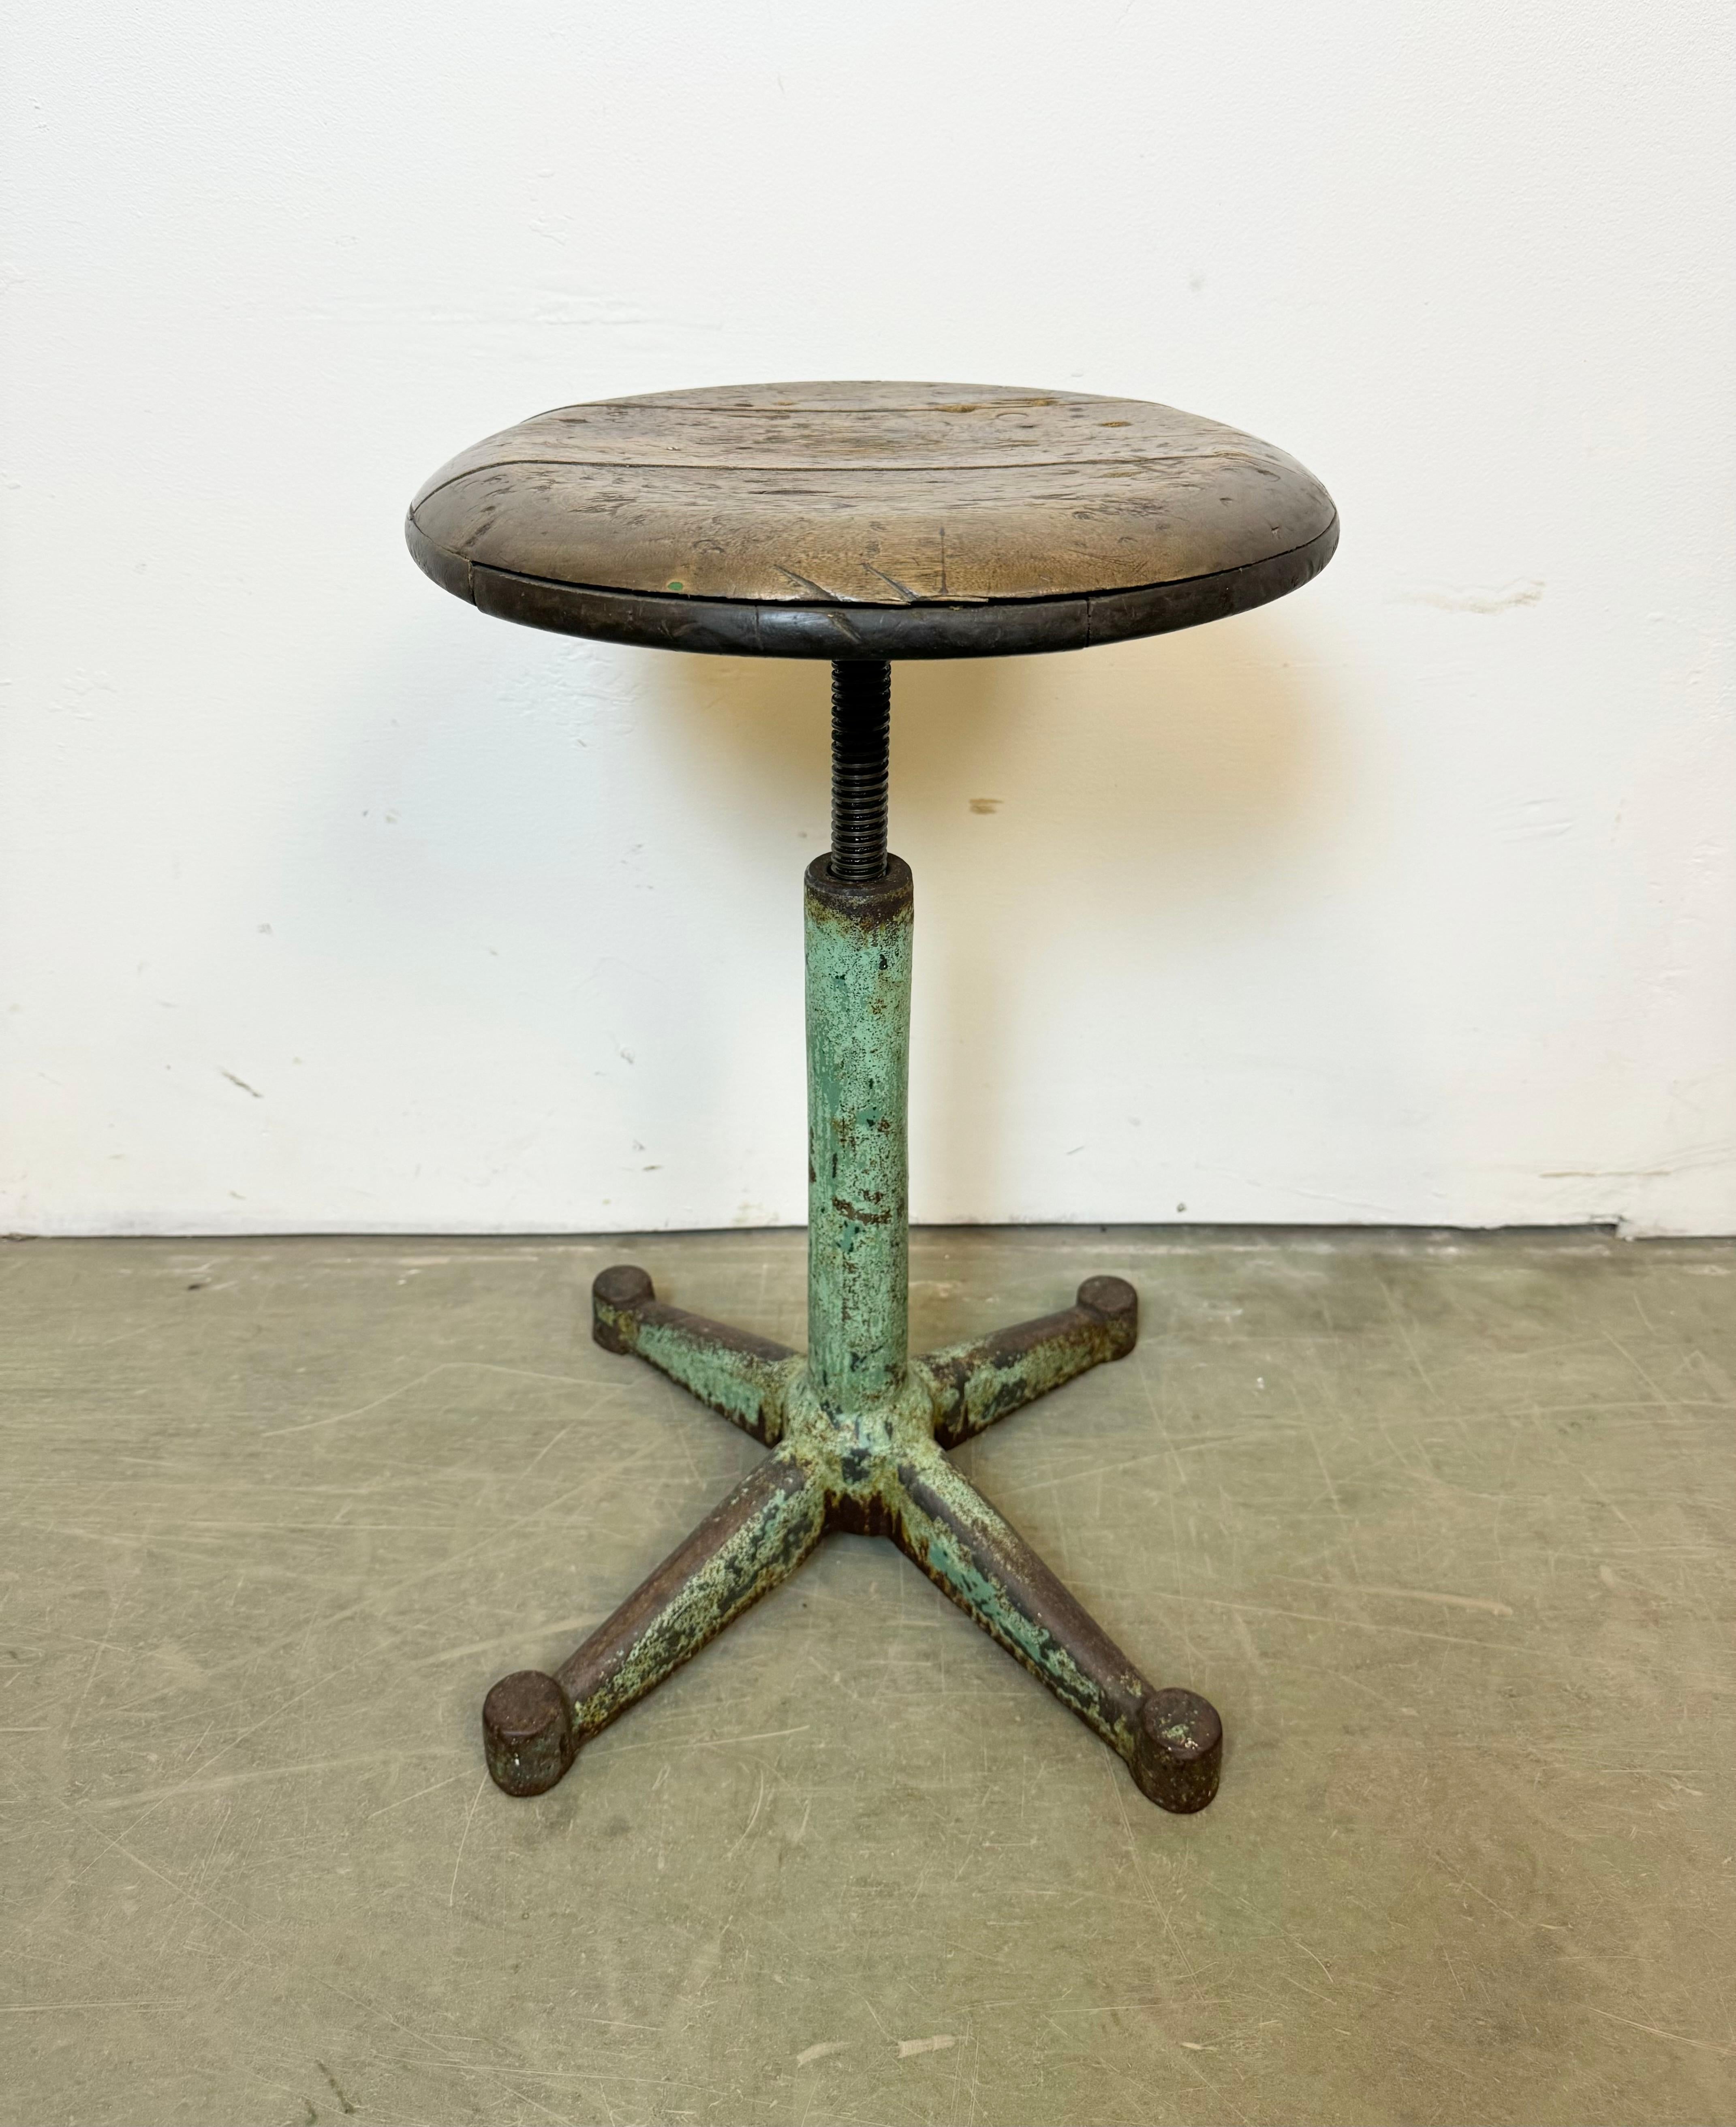 Industrial four-legged height adjustable workshop stool made in Poland during the 1960s.It features a green cast iron base and a wooden seat.
Measures: Min.- Max. seat height: 43 cm - 68 cm.
Seat diameter: 34 cm.
Weight: 6 kg